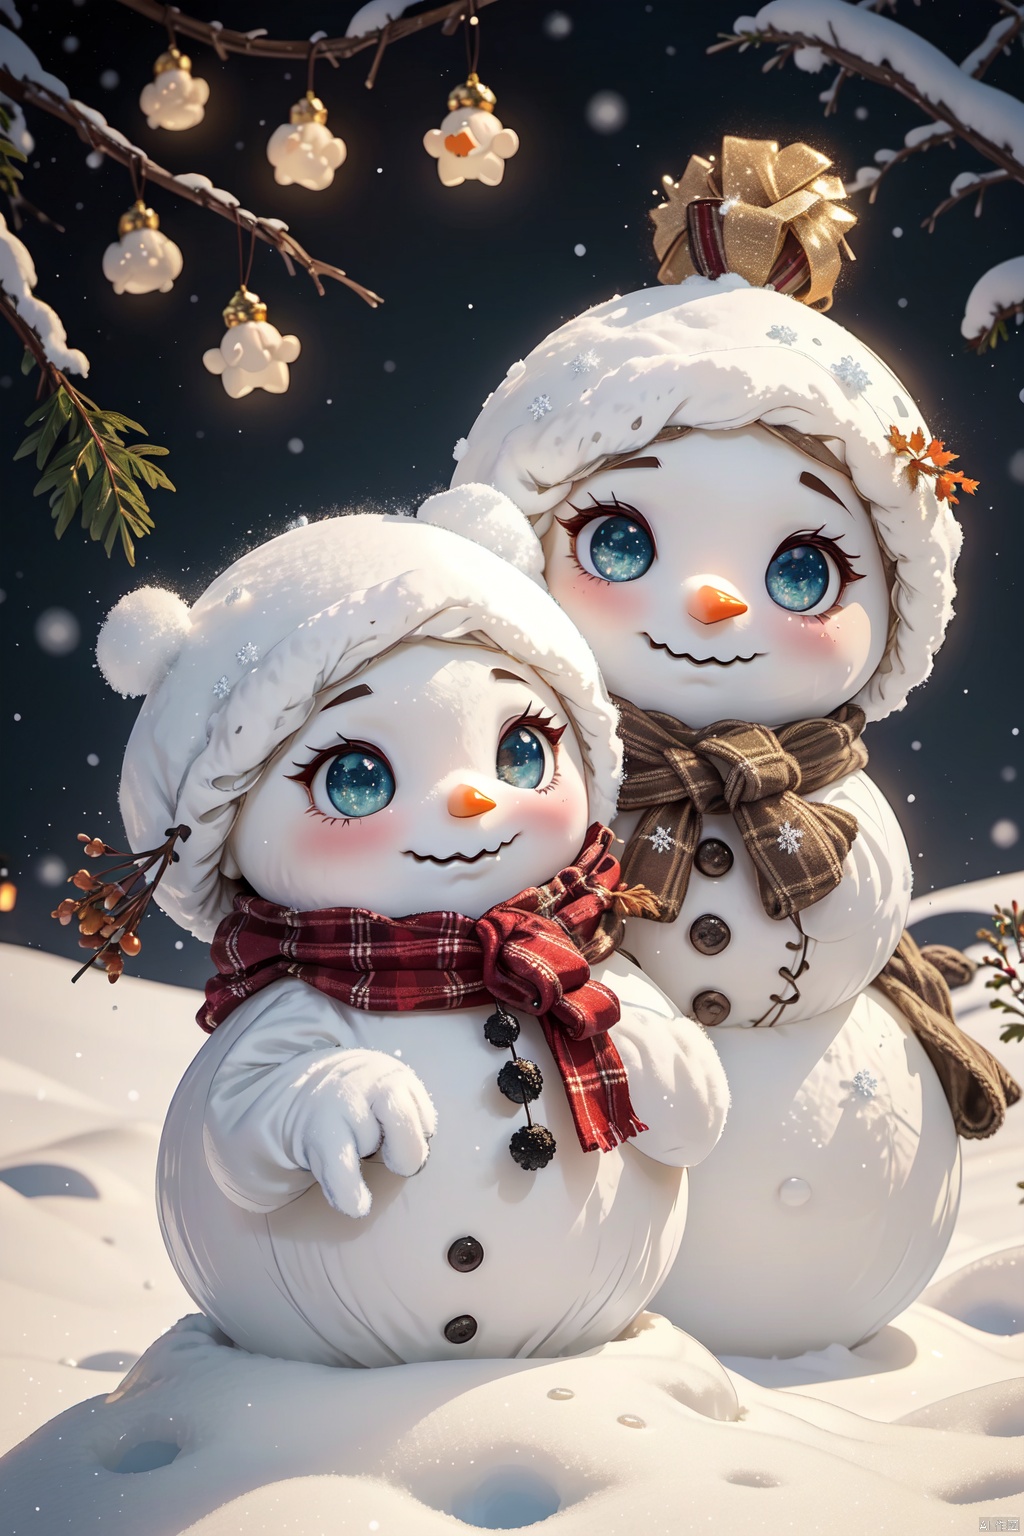  extremely detailed CG unity8 k wallpaper,masterpiece,best quality,
Theme: Cozy Winter Wonderland, Character: Snowman, Style: Warmth, Background: Snow-covered Park
Prompt words: A jolly snowman stands tall in a snow-covered park, surrounded by frosty trees and twinkling Christmas lights. Its carrot nose glows with warmth and its coal eyes sparkle with joy. Sparkling snowflakes fall gently from the sky, adding to the cozy winter wonderland atmosphere.